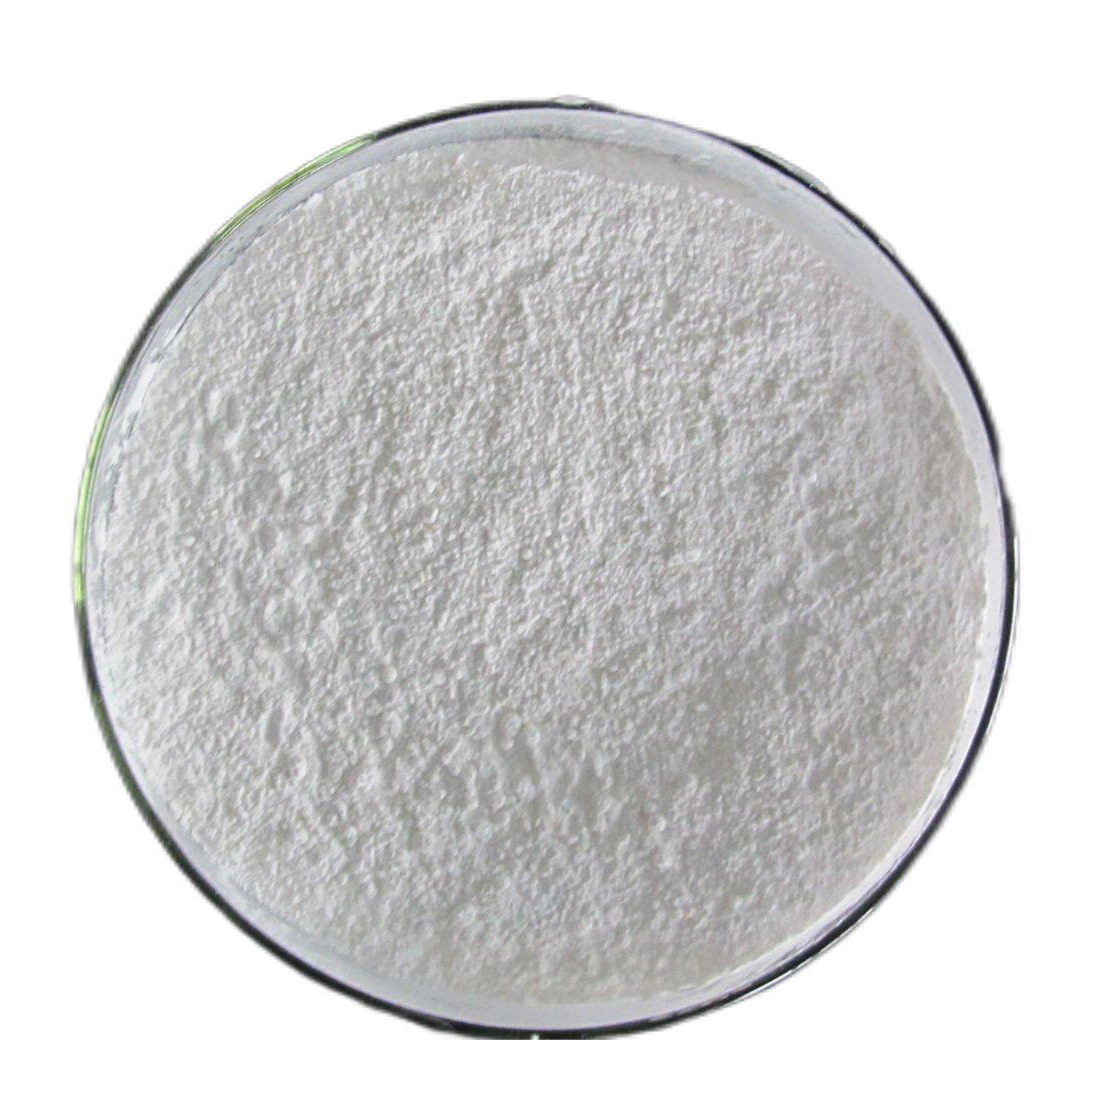 Antioxidant CPL (LW-616) for Tyre Manufactures and Rubber Industries